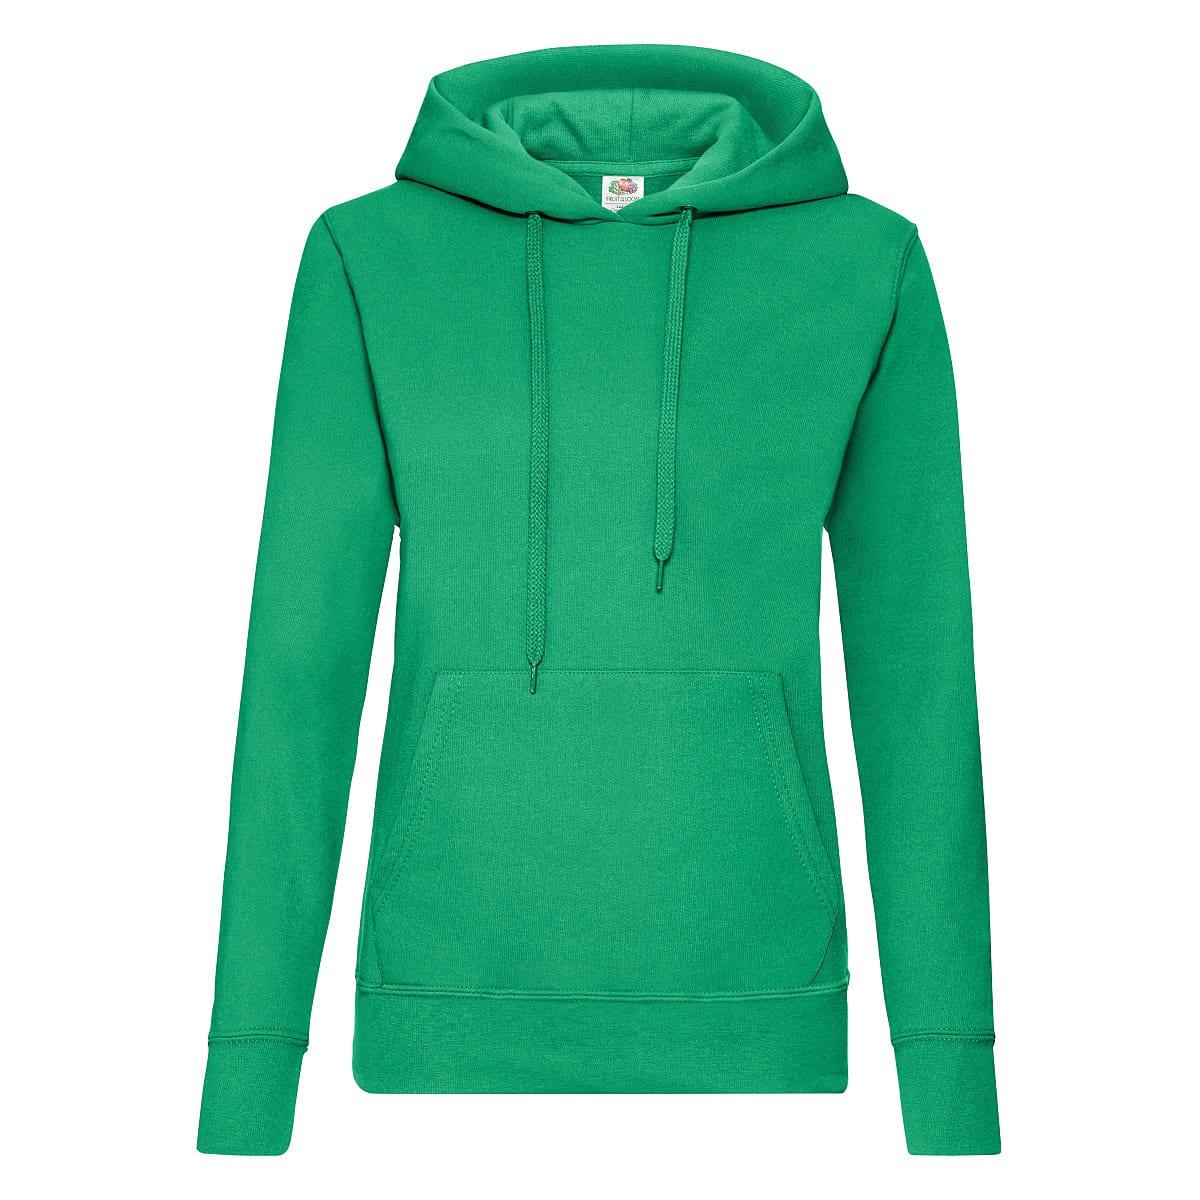 Fruit Of The Loom Lady-Fit Classic Hoodie in Kelly Green (Product Code: 62038)